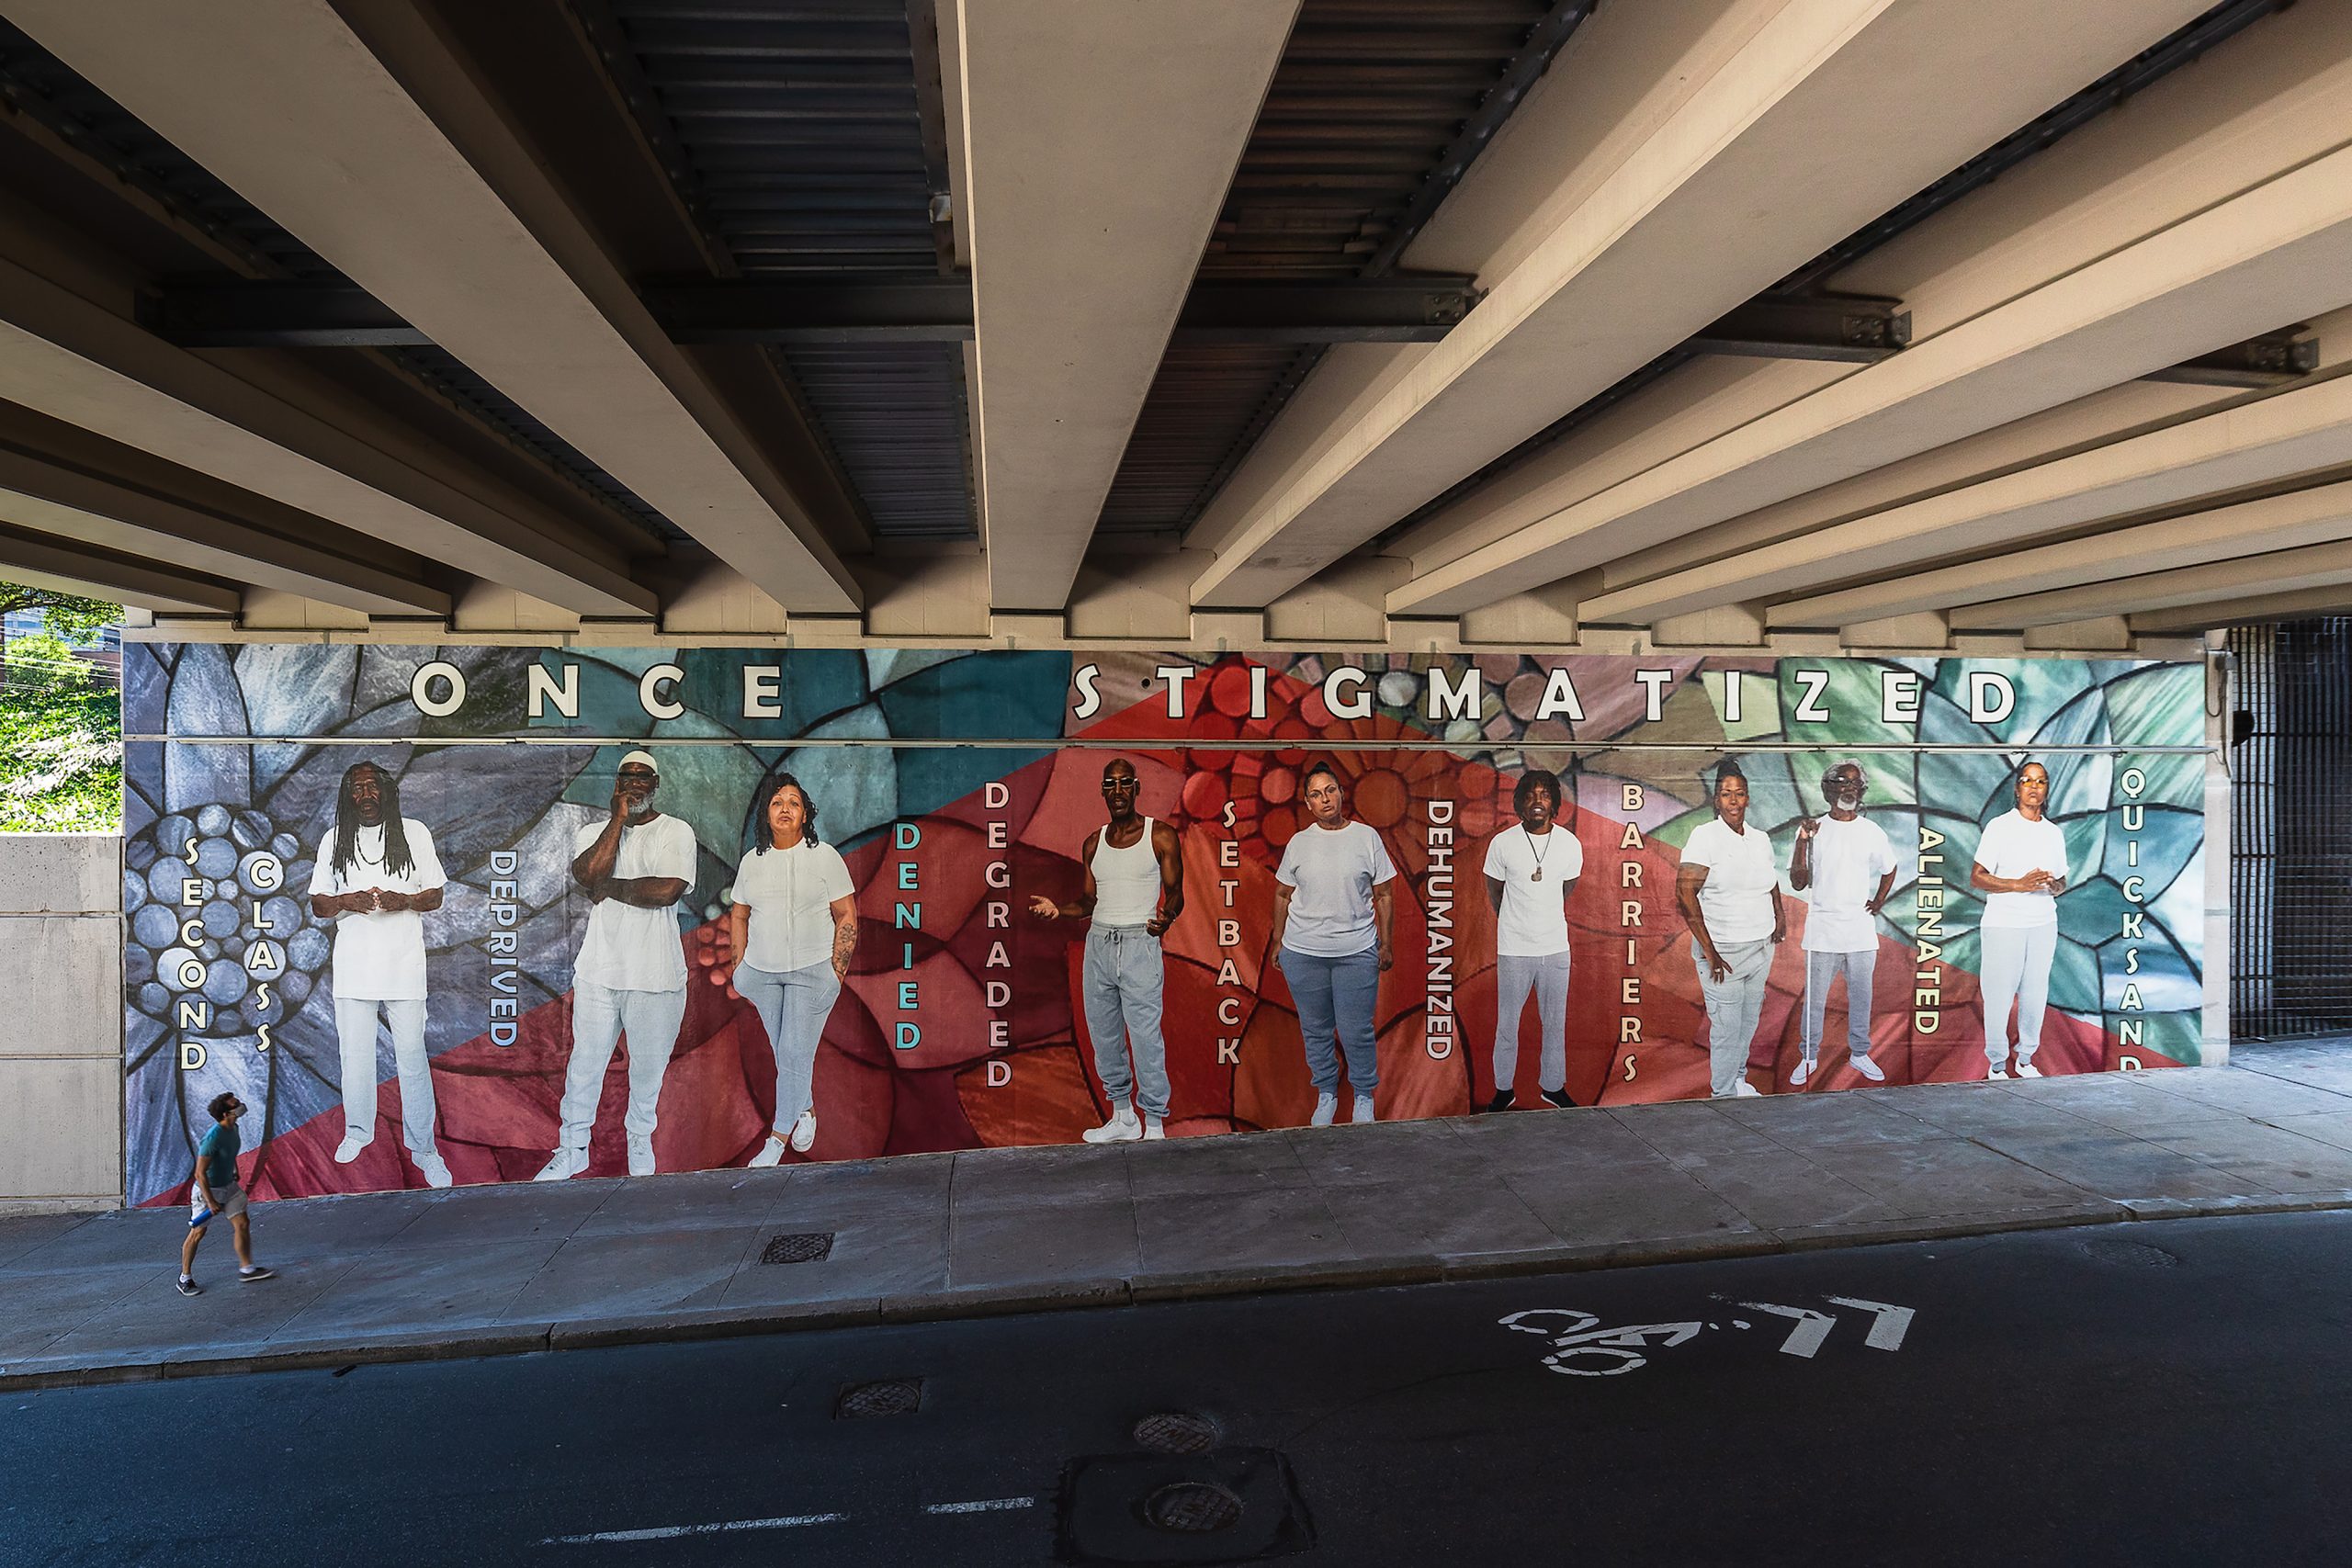 A public mural facing a street shows Black men and women standing in pale clothes against a background of floral shapes in gray, with a triangle of transparent red layered over it, and words capturing stigma. Above them are the words 